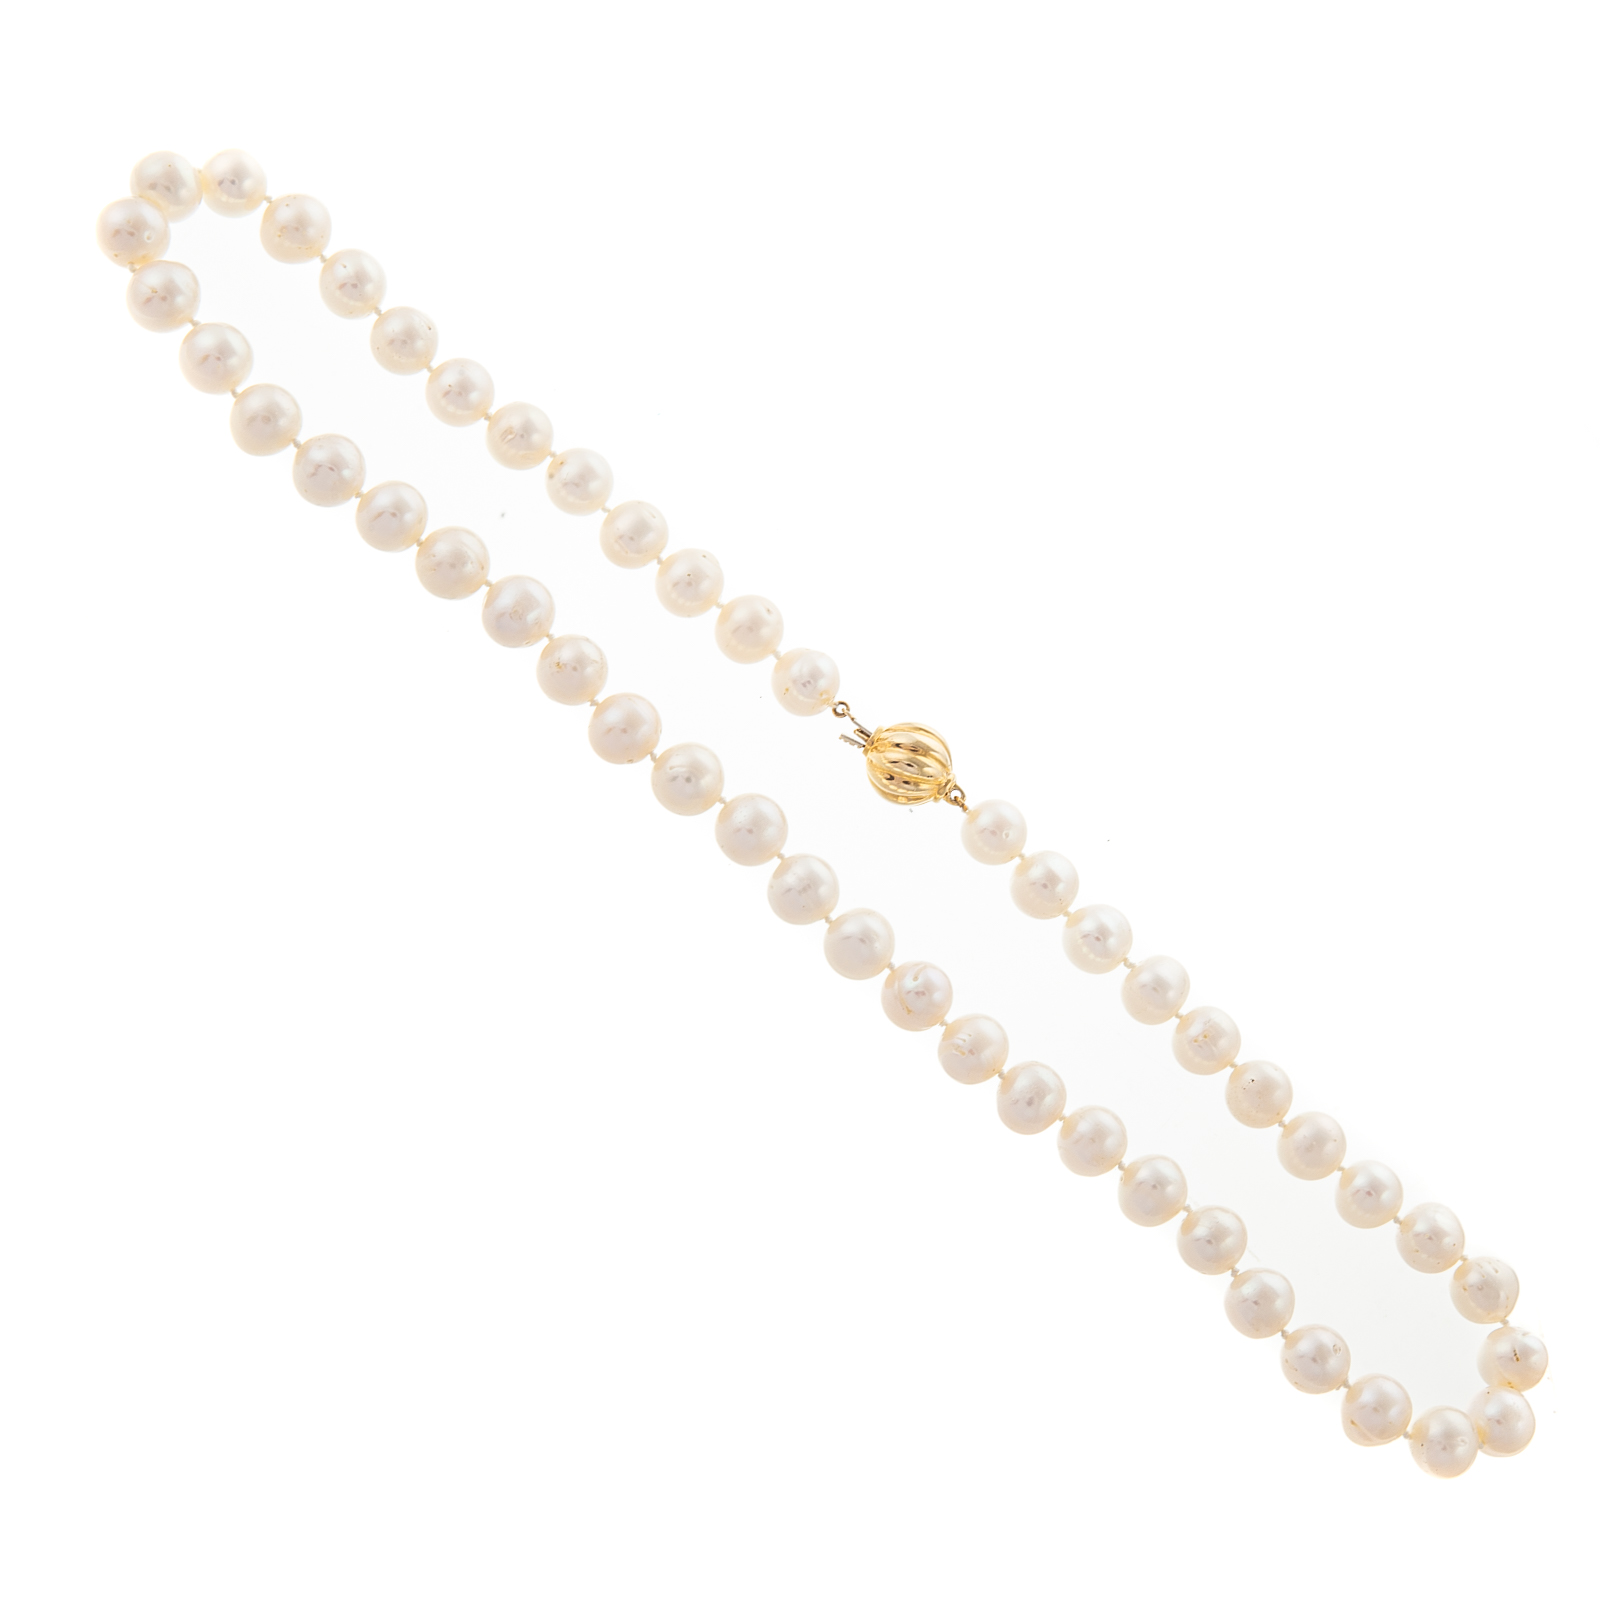 A 10 MM FRESH WATER PEARL NECKLACE